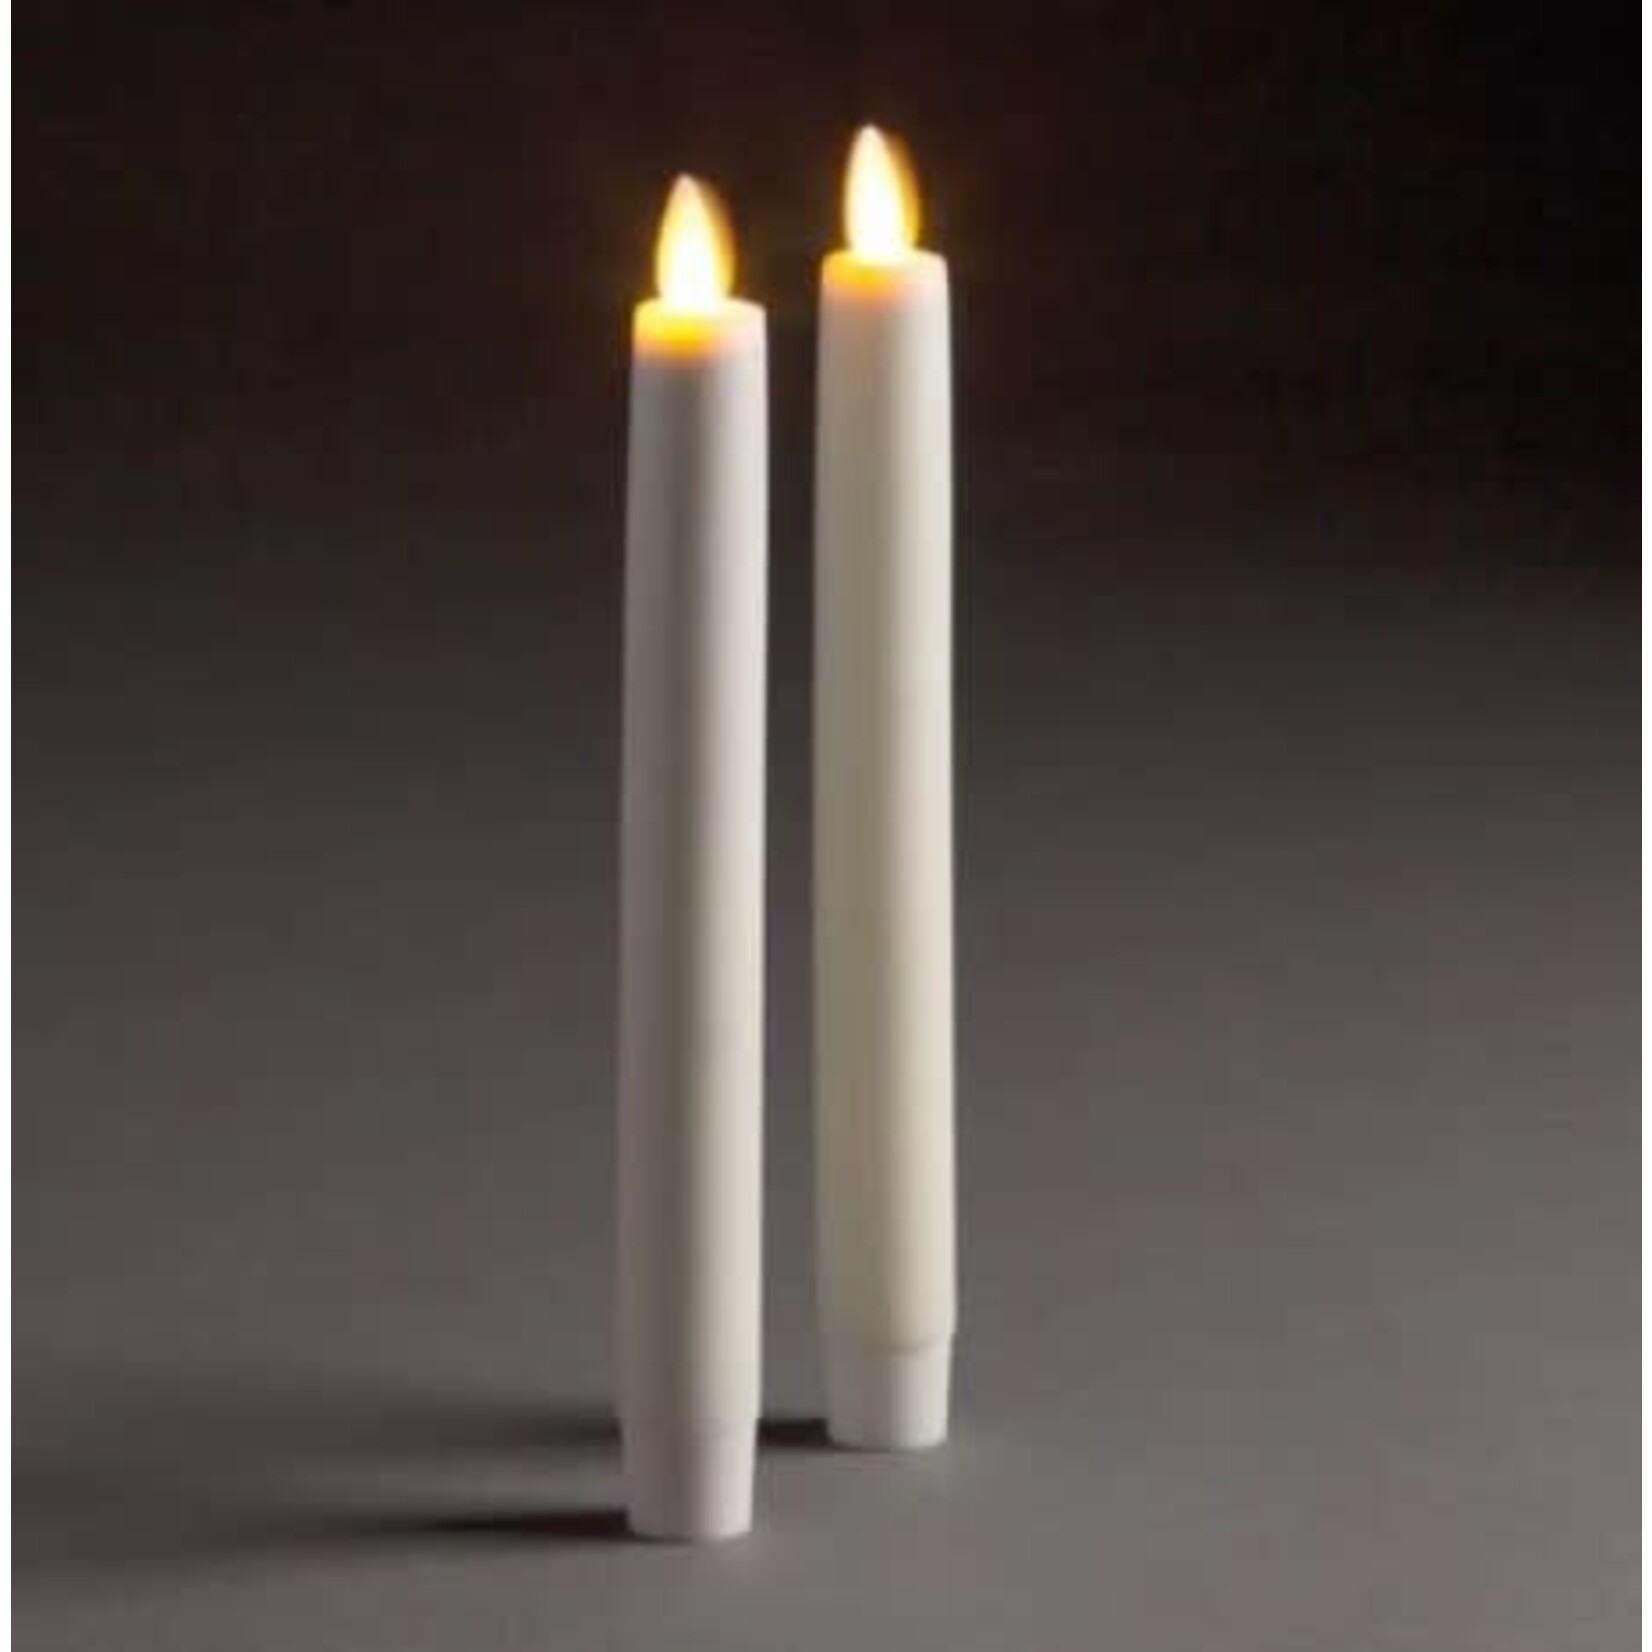 Napa Home and Garden Lightli Moving Flame Indoor Set of 2 Tapers